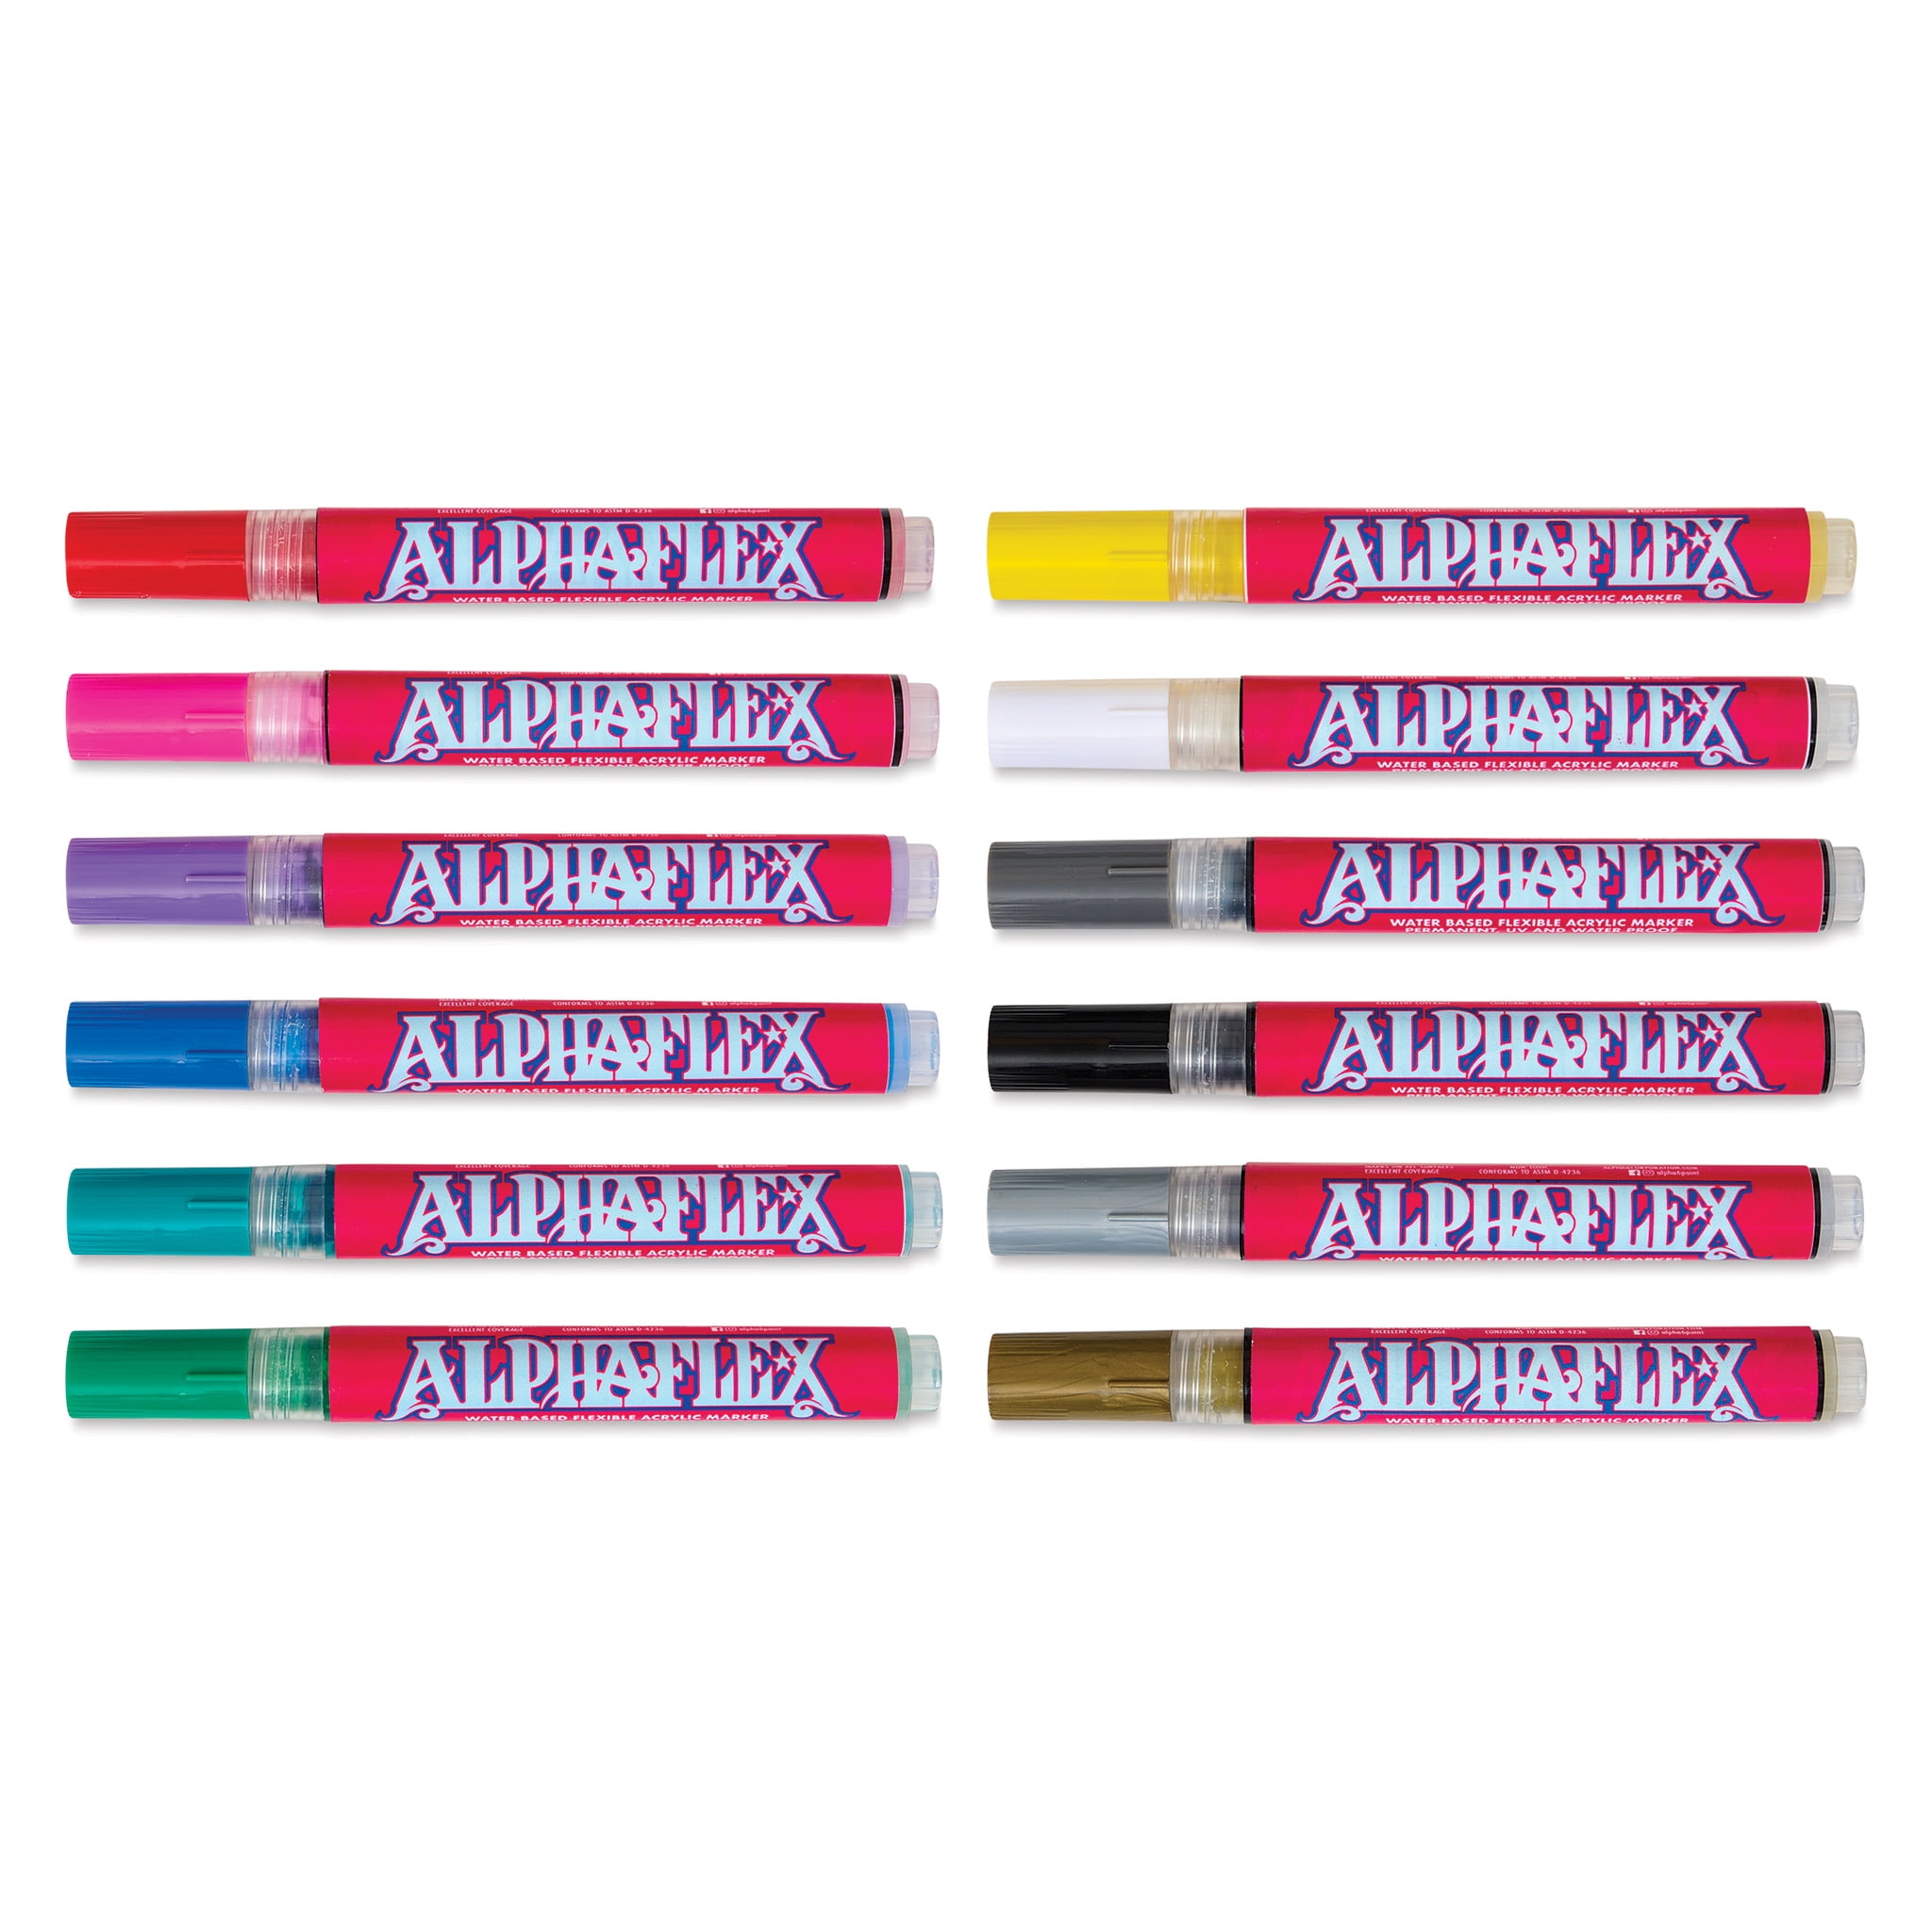 PINTAR Metallic Markers Paint - Metallic Paint Pens Fine Point - Fine Tip Paint  Pens - Acrylic Markers Paint Pens - Acrylic Paint Pens for Rock Painting,  Wood, Glass, Leather, Shoes - Pack of 14